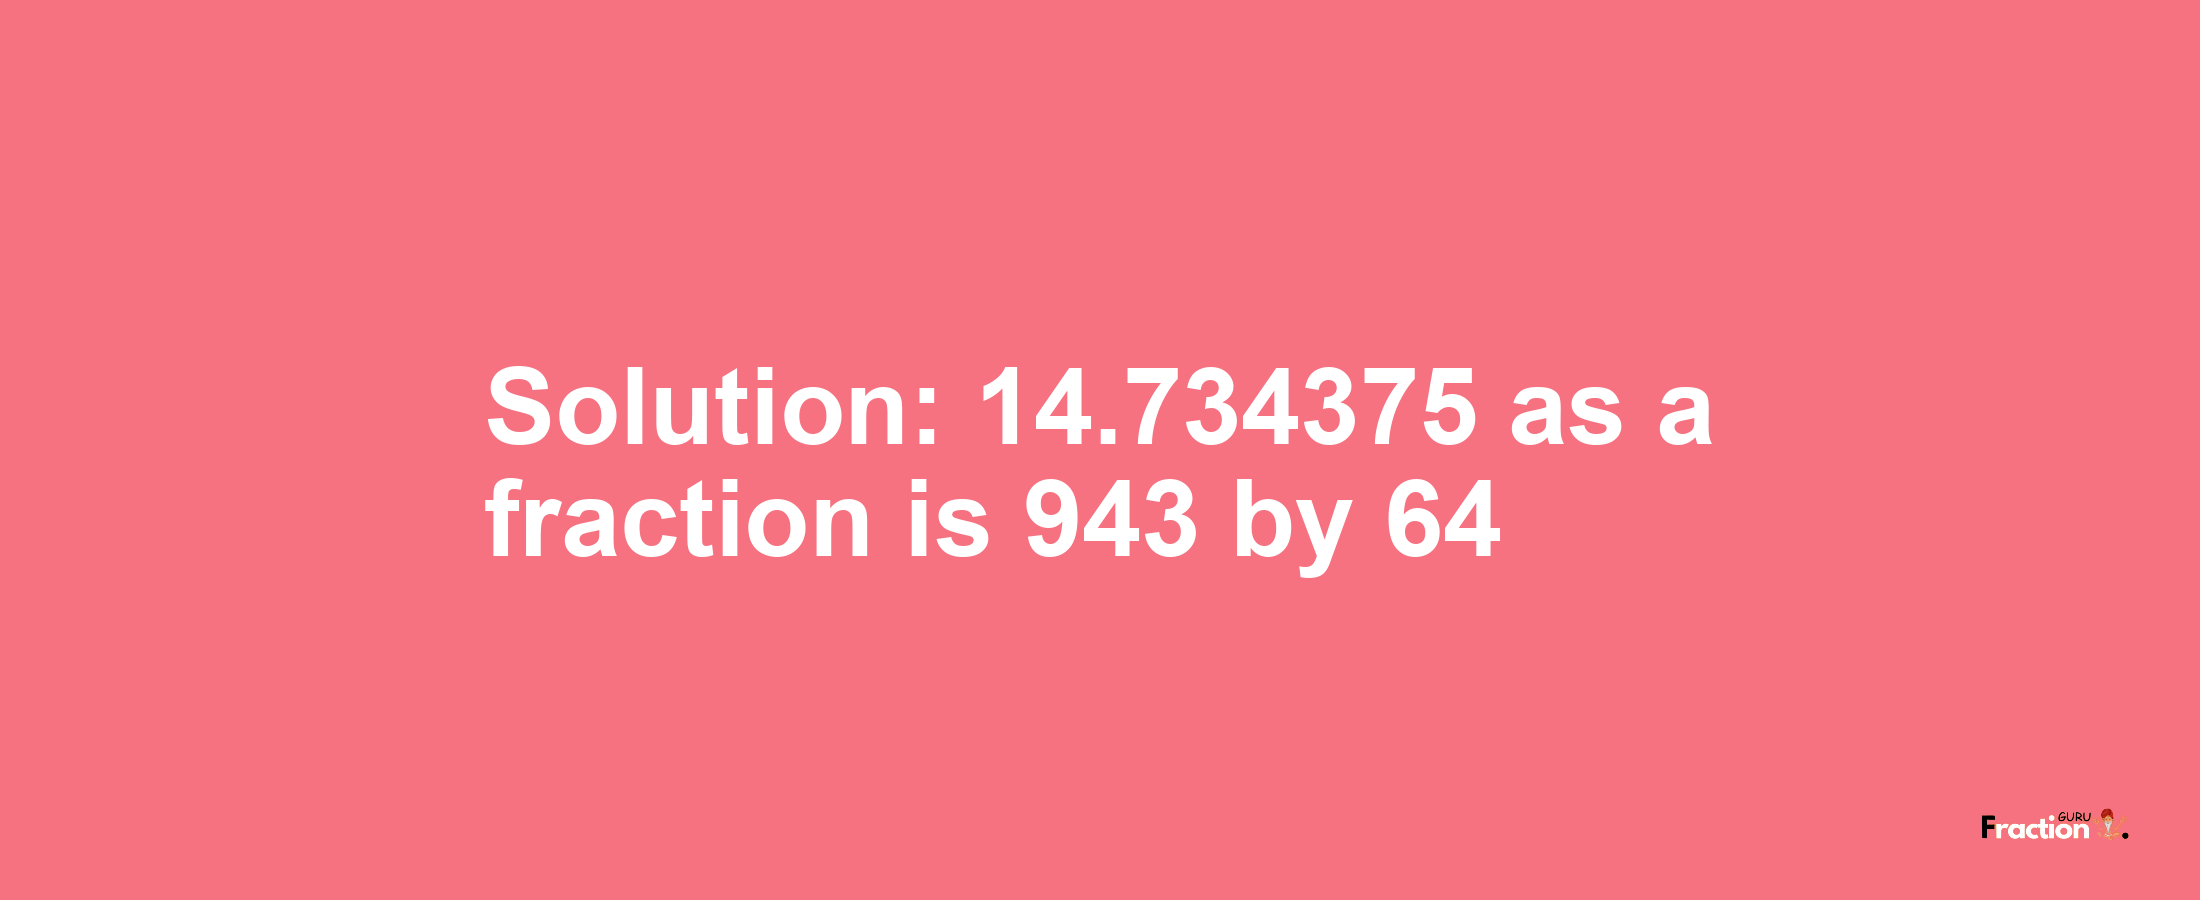 Solution:14.734375 as a fraction is 943/64